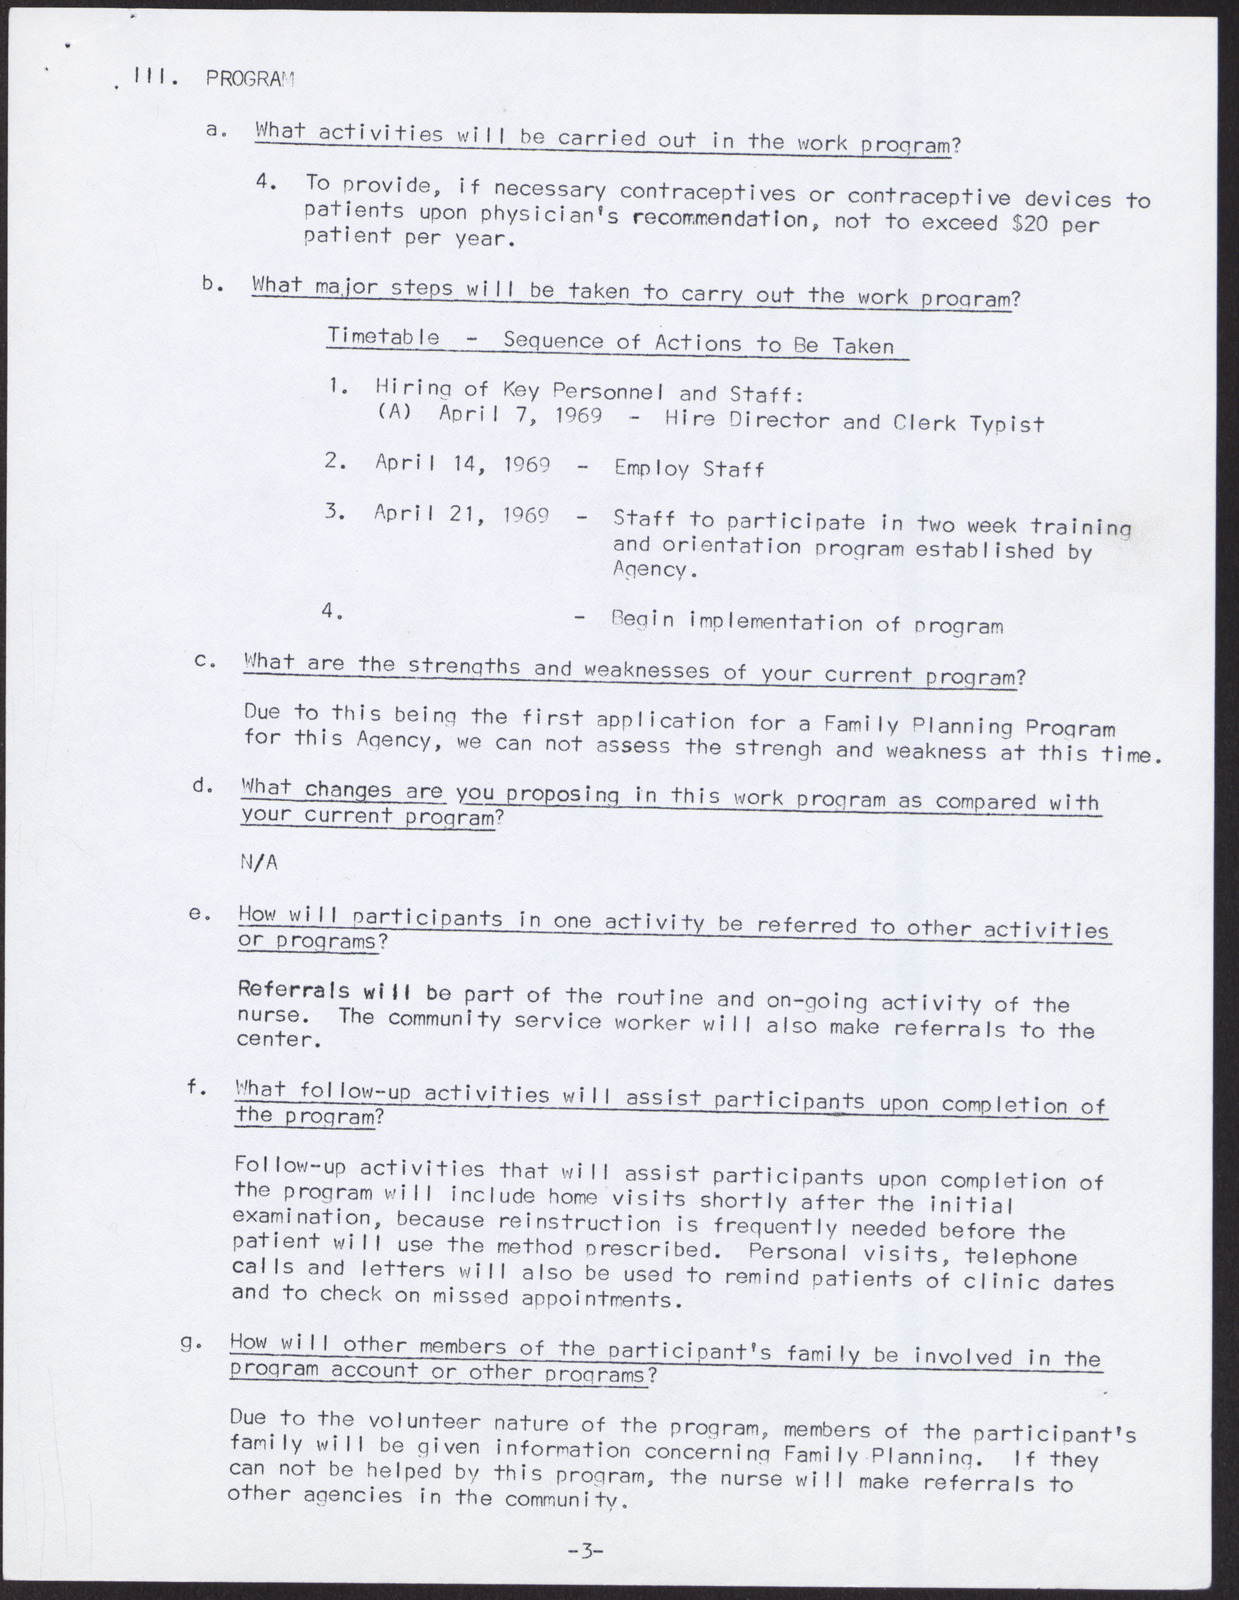 United Fund of Clark County, Inc. Manual of Operations (8 pages, possibly out of sequence or unrelated), no date, page 4